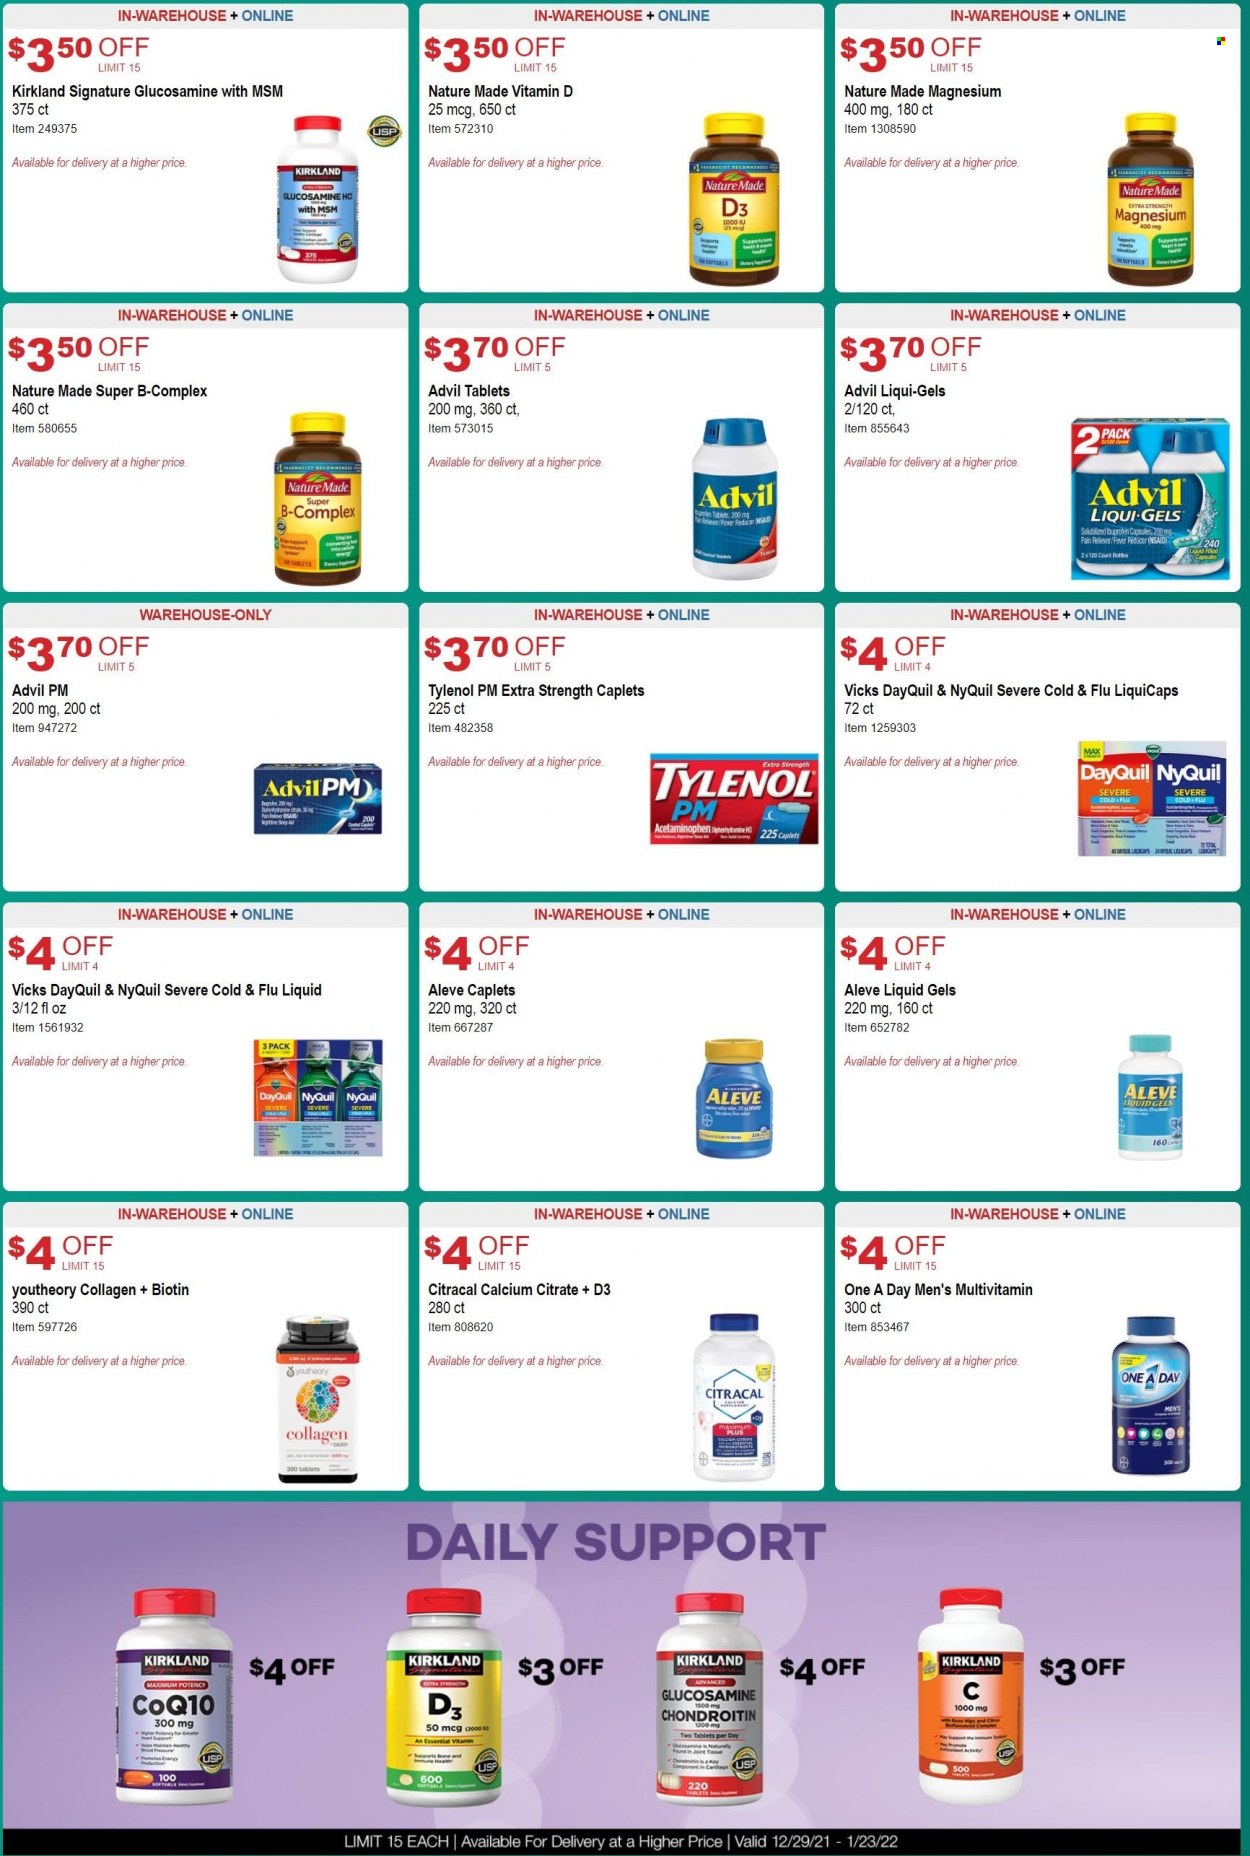 thumbnail - Costco Flyer - 12/29/2021 - 01/23/2022 - Sales products - Hewlett Packard, cod, tissues, Vicks, pan, Aleve, Biotin, calcium, DayQuil, Cold & Flu, glucosamine, magnesium, multivitamin, Nature Made, Tylenol, NyQuil, Advil Rapid, vitamin D3. Page 9.